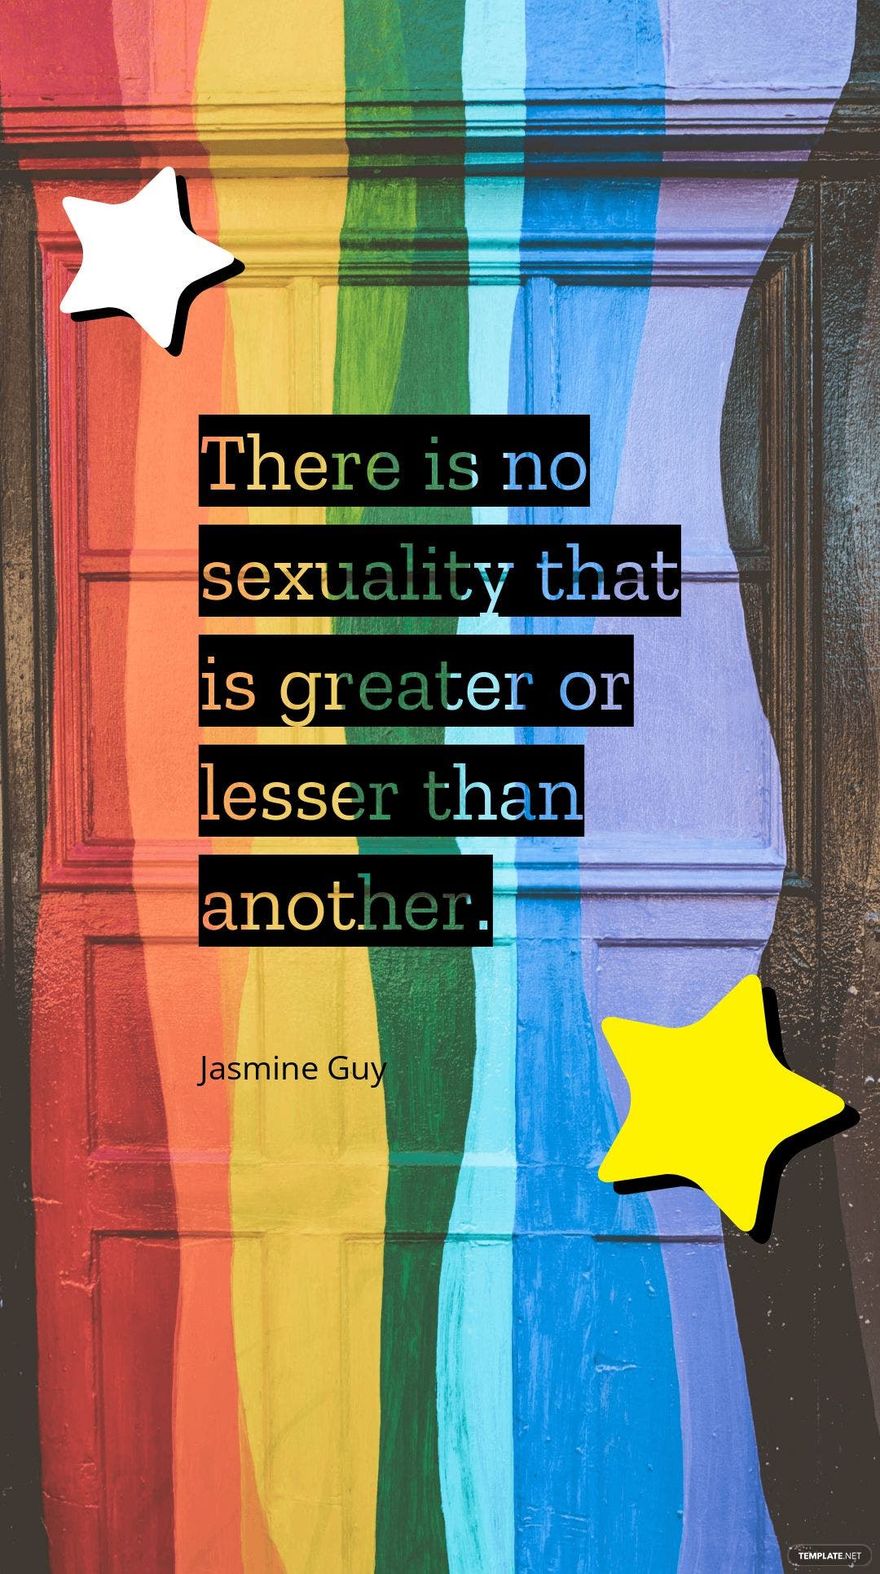 Jasmine Guy - There is no sexuality that is greater or lesser than another.